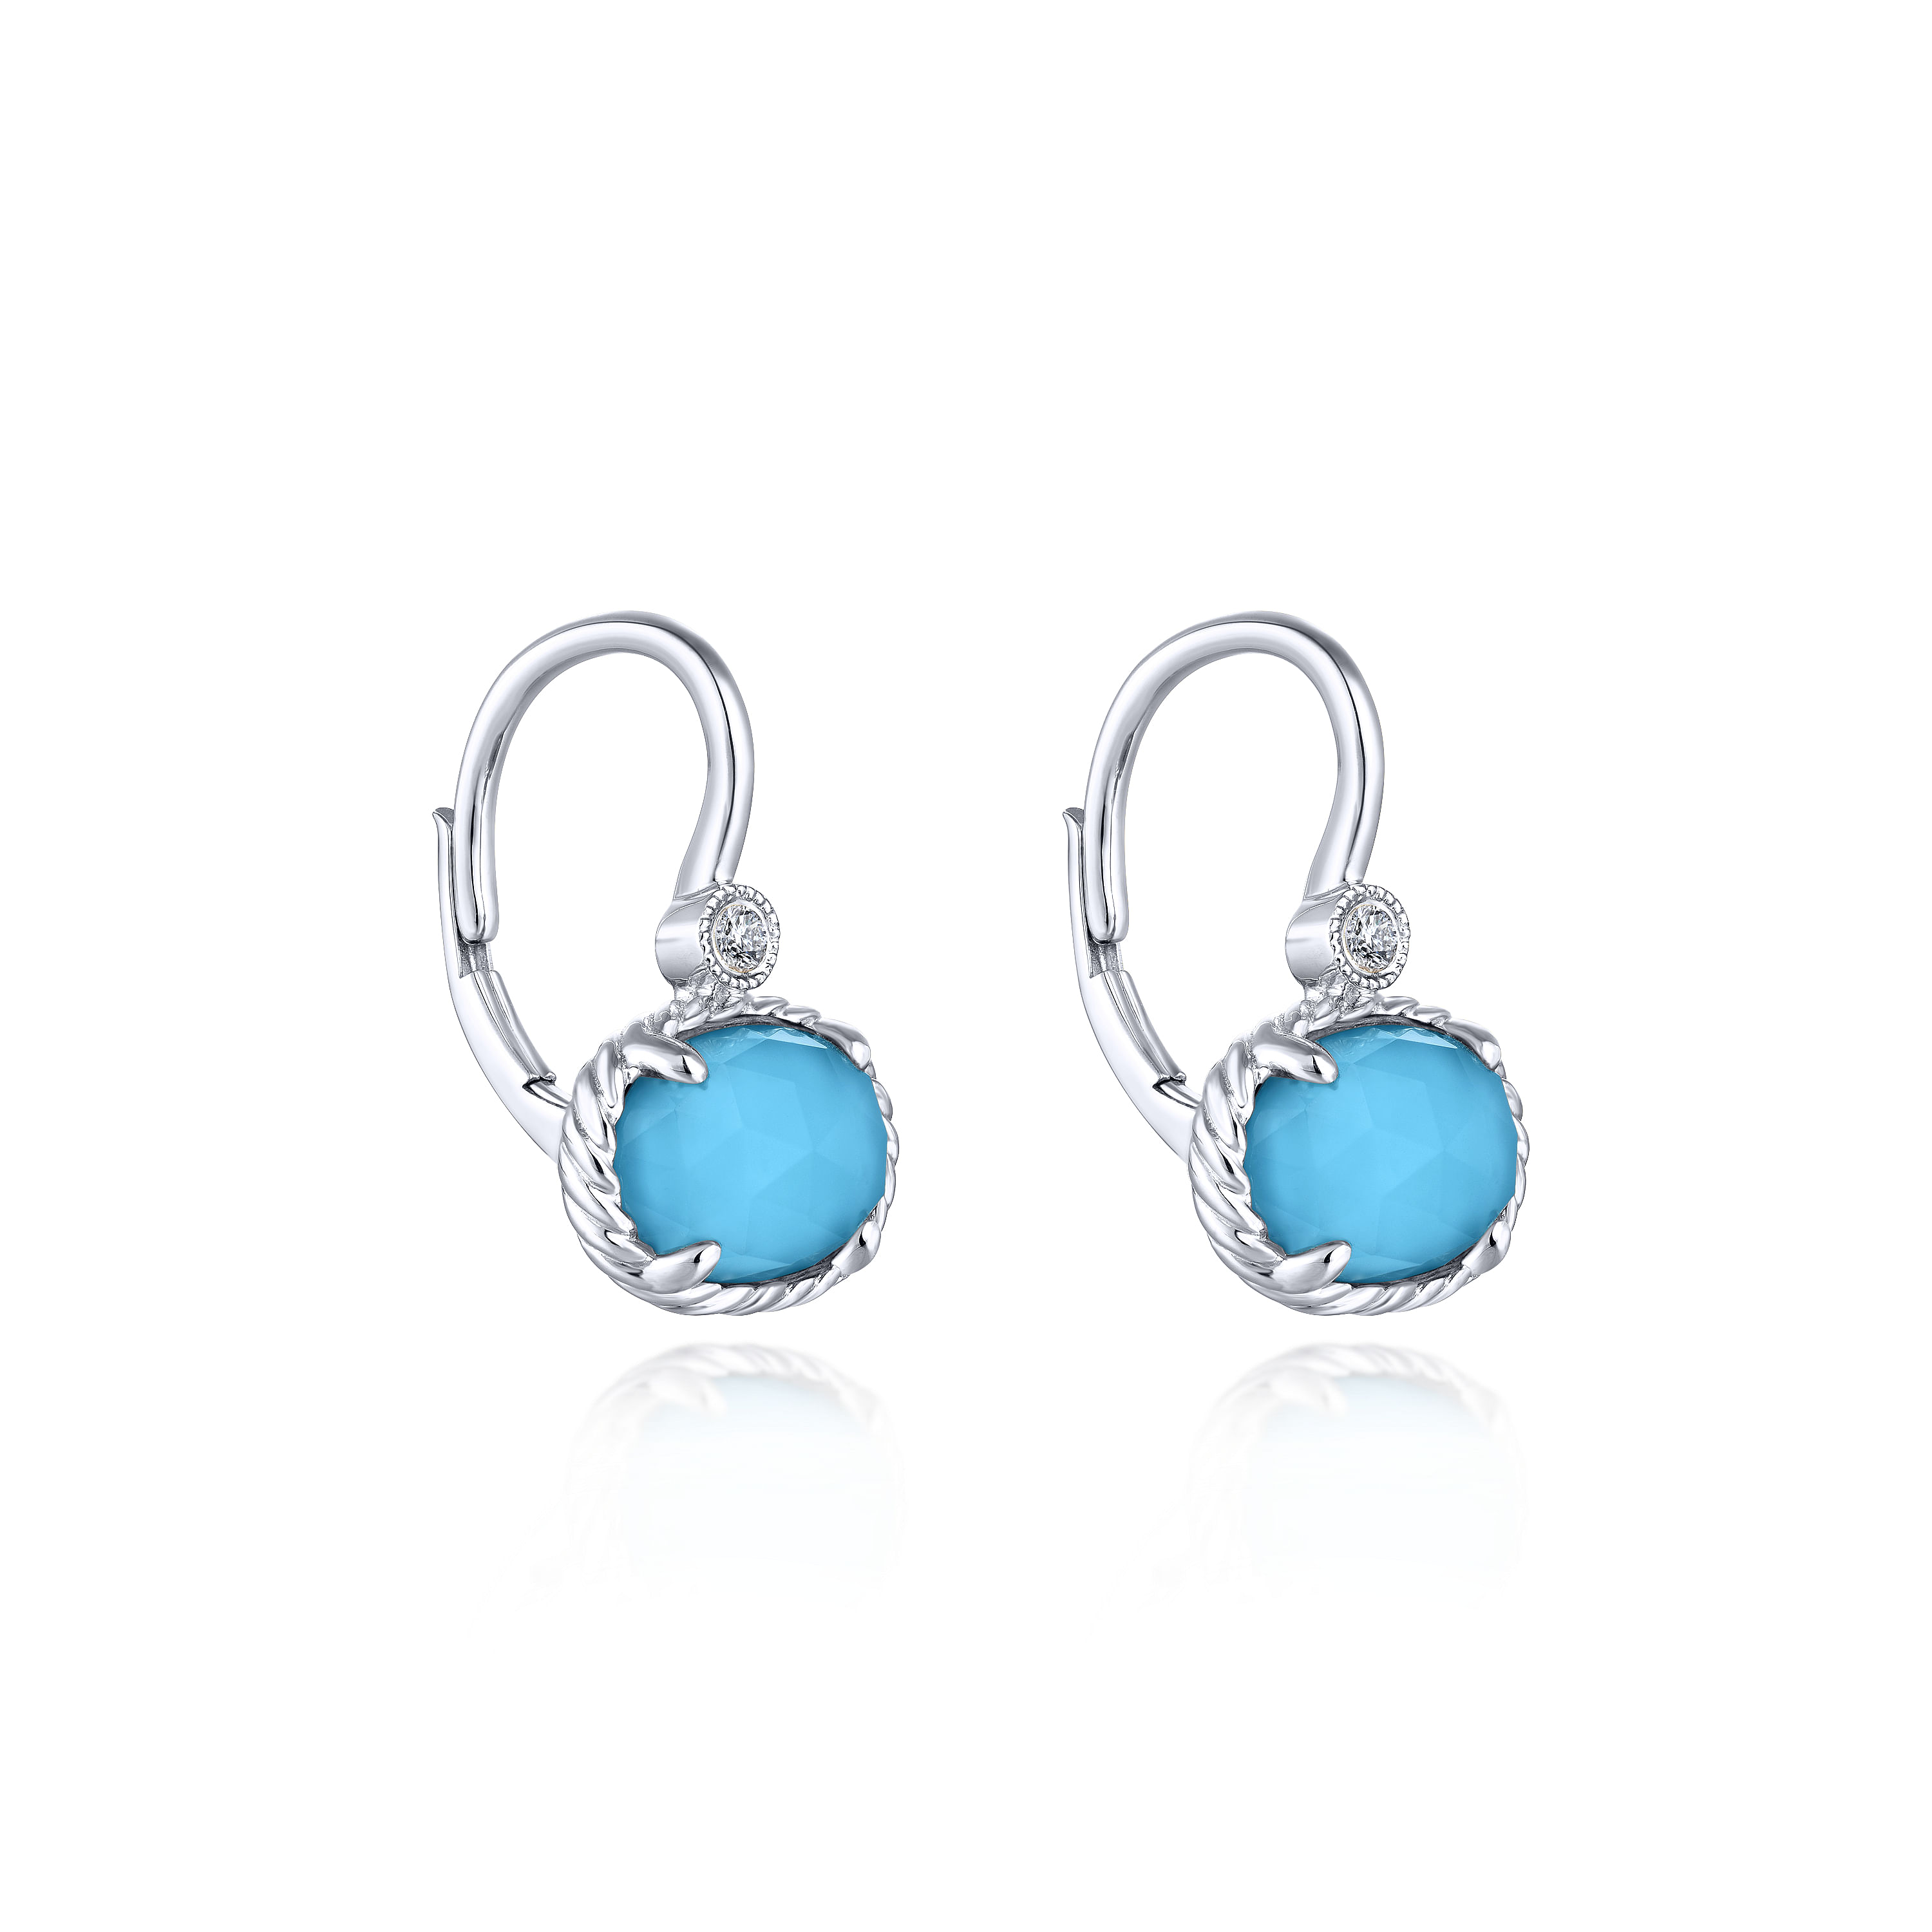 14K White Gold Rock Crystal/Turquoise and Diamond Drop Earrings